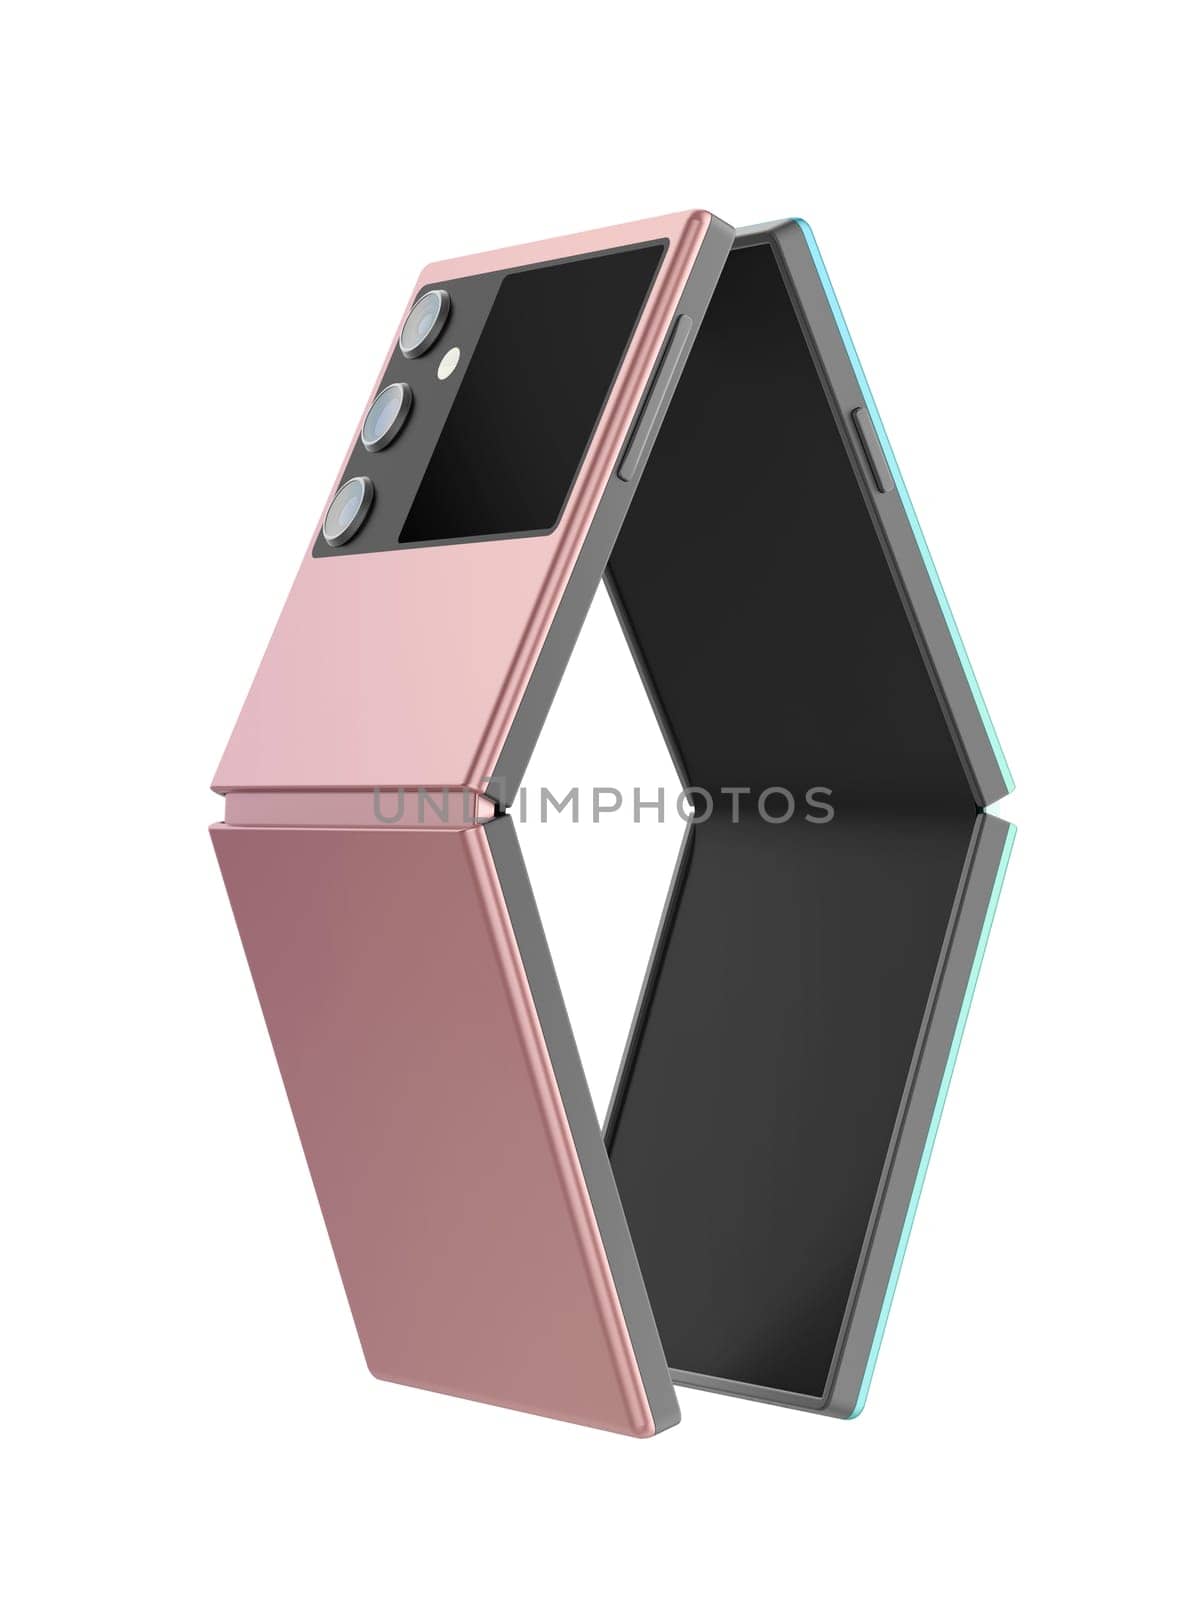 Two foldable smartphones by magraphics